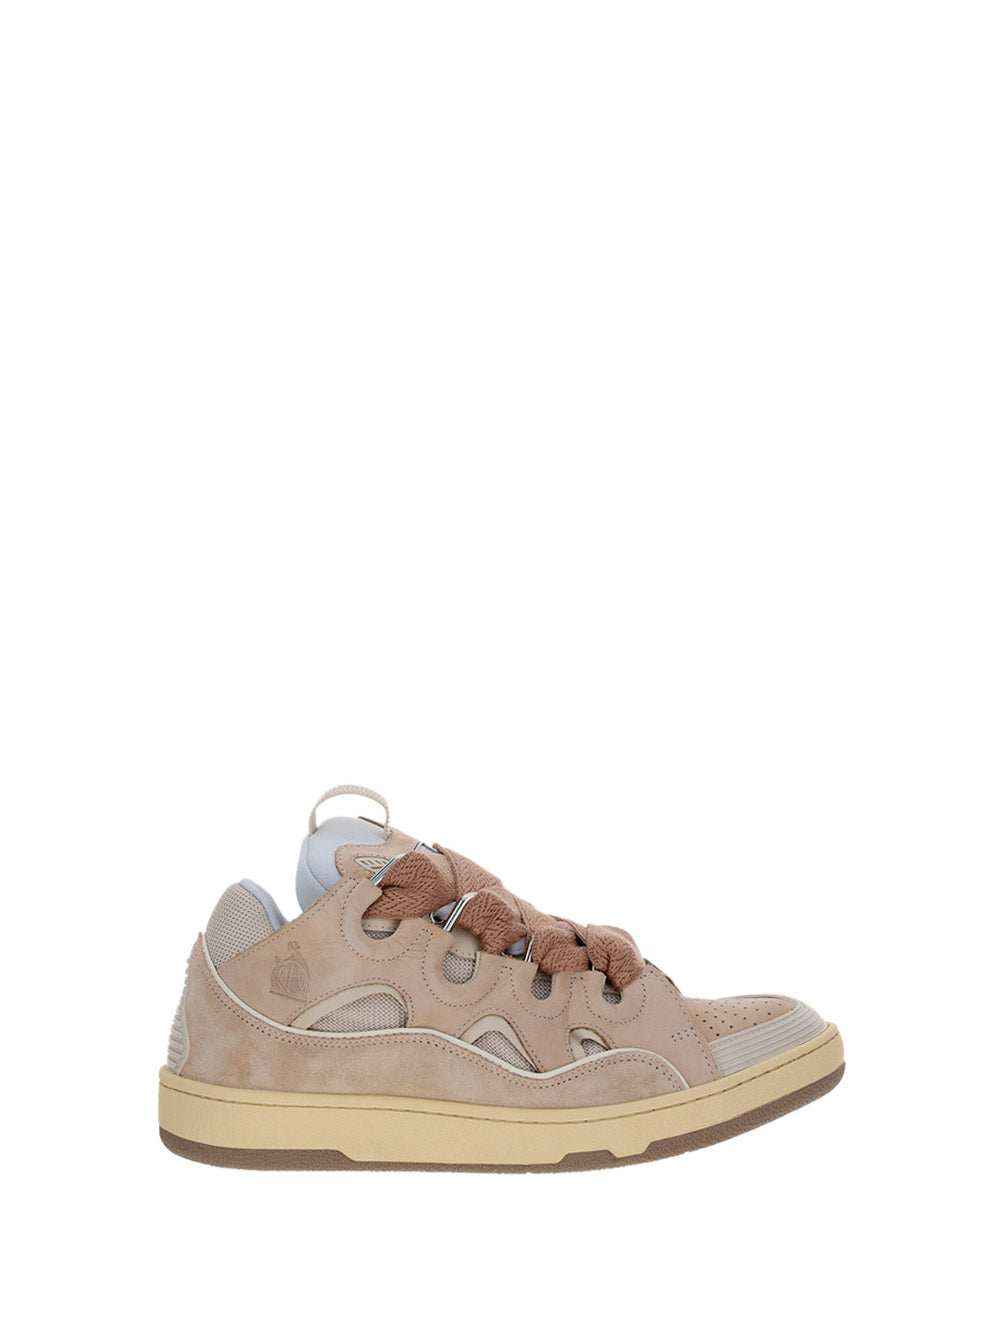 Leather Curb Sneakers - Dusty Pink/Brown